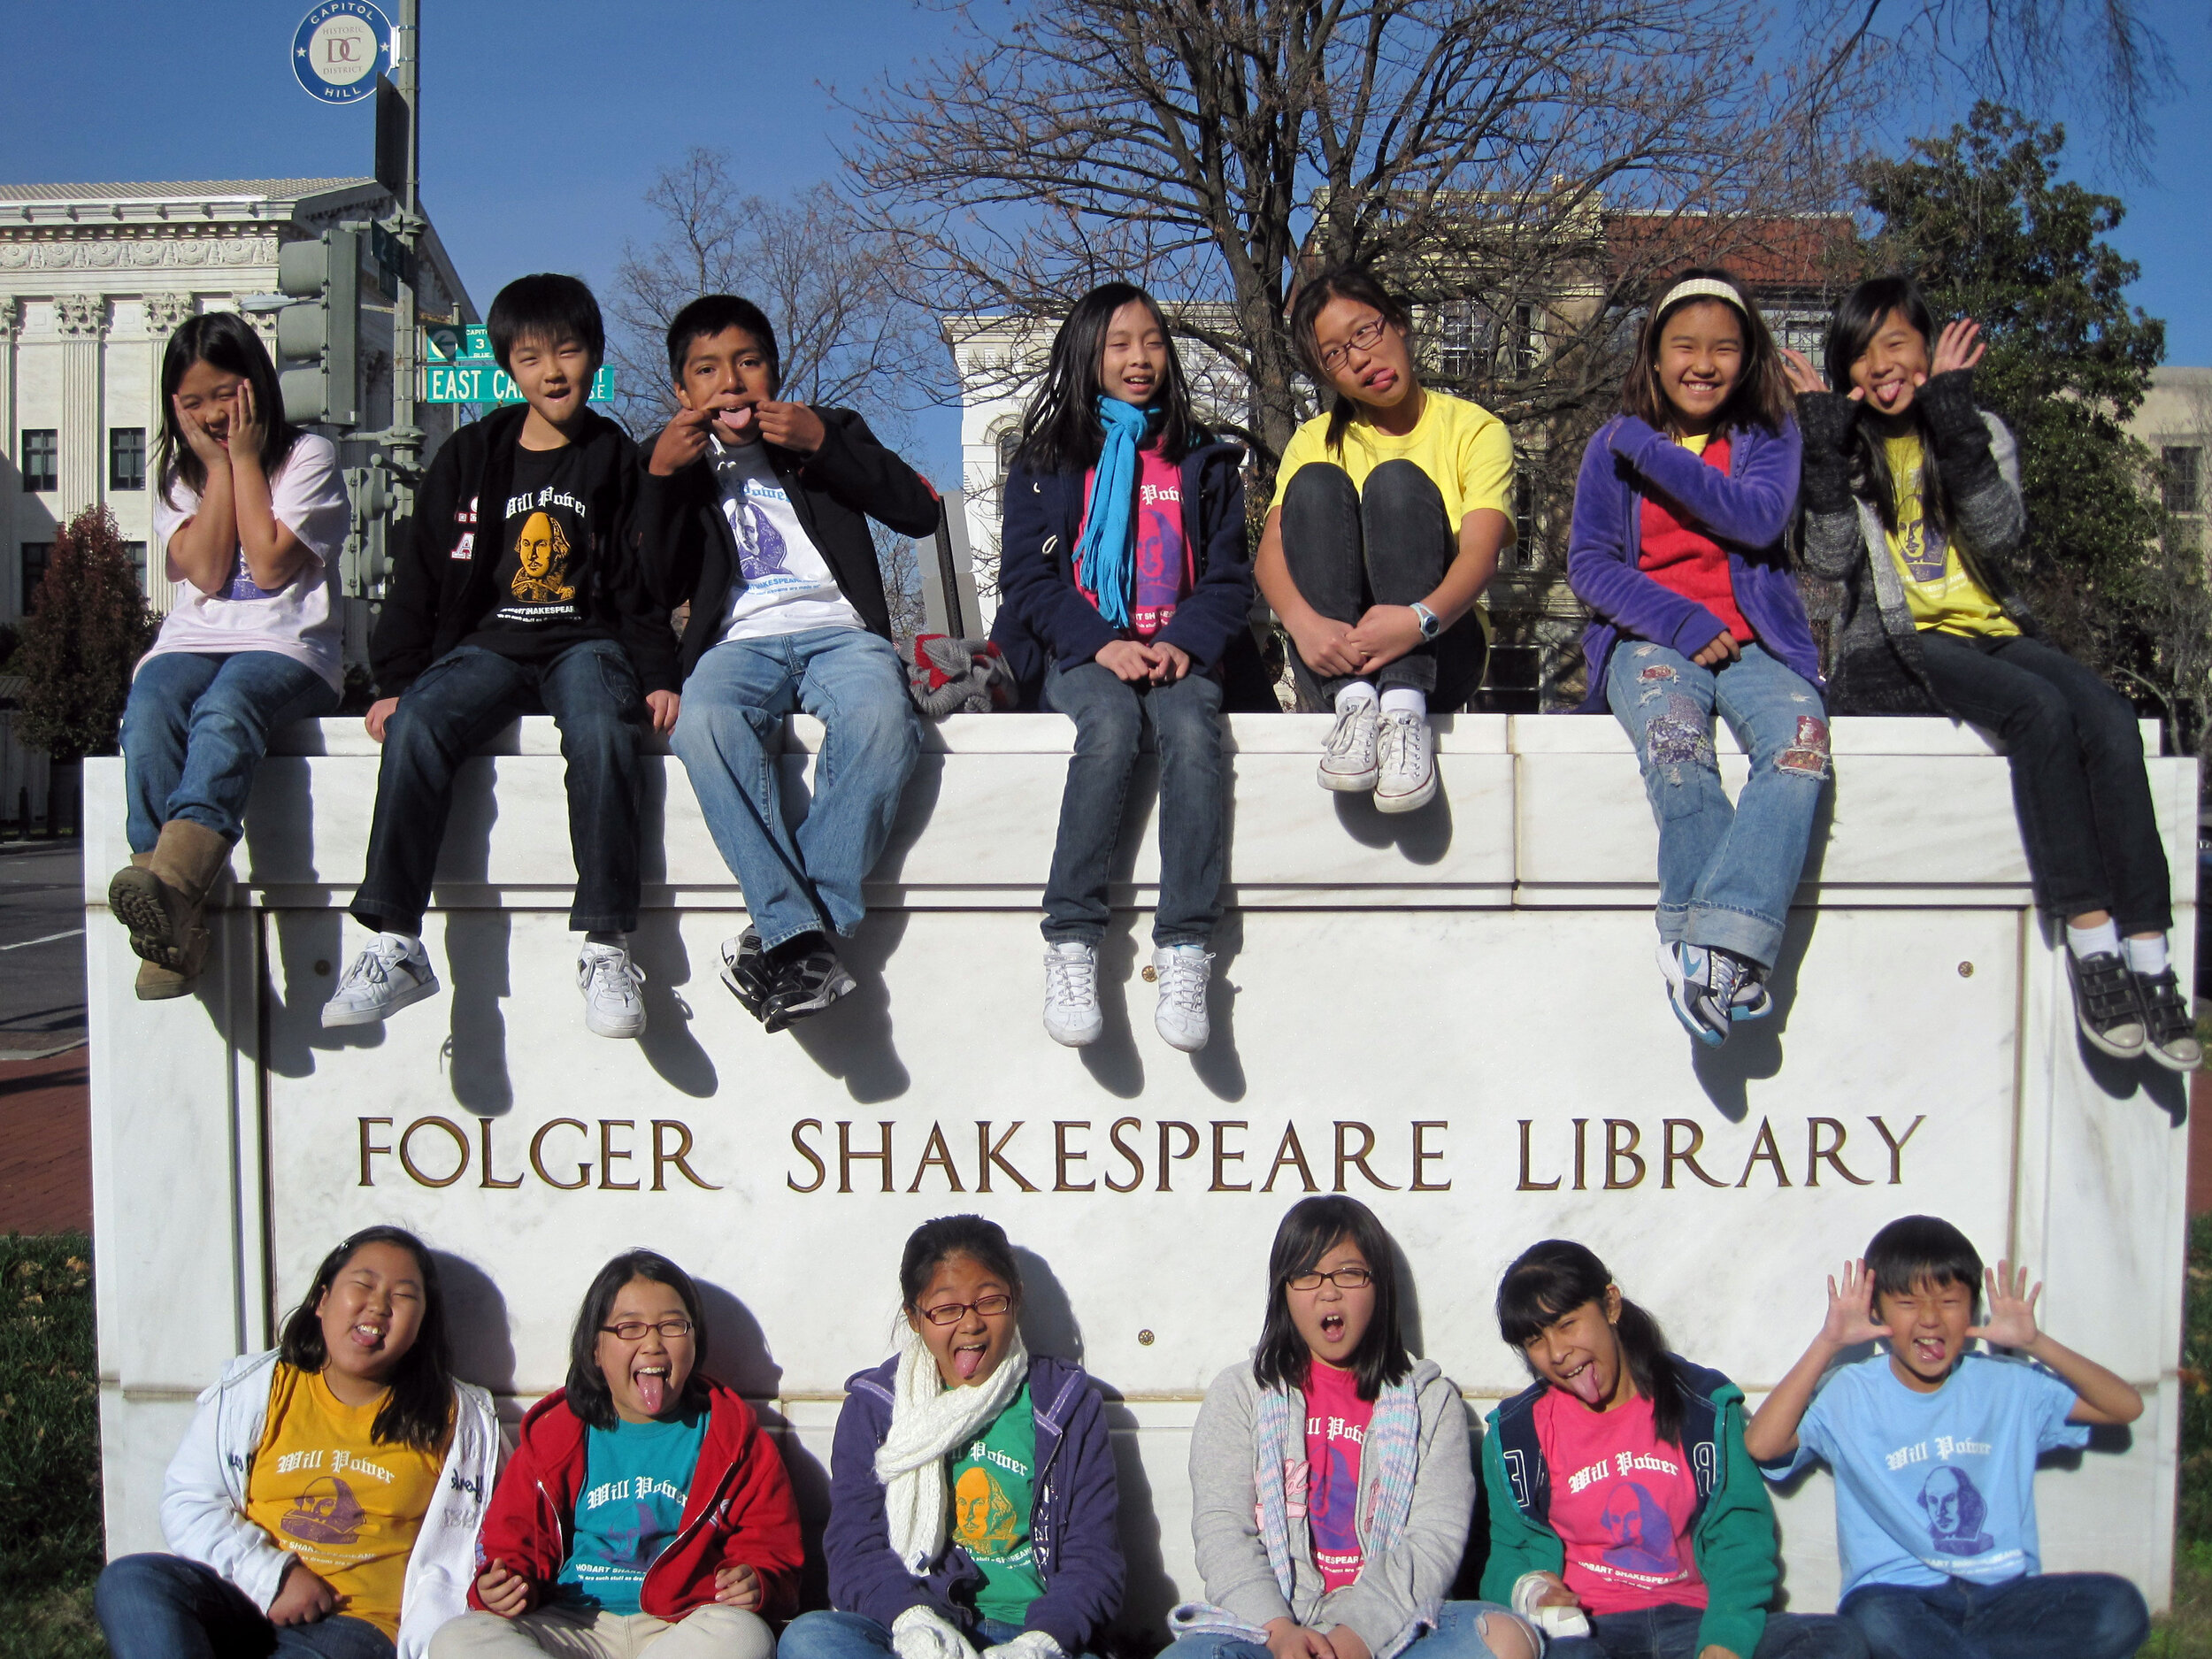  Getting Silly at the Folger Shakespeare Library 